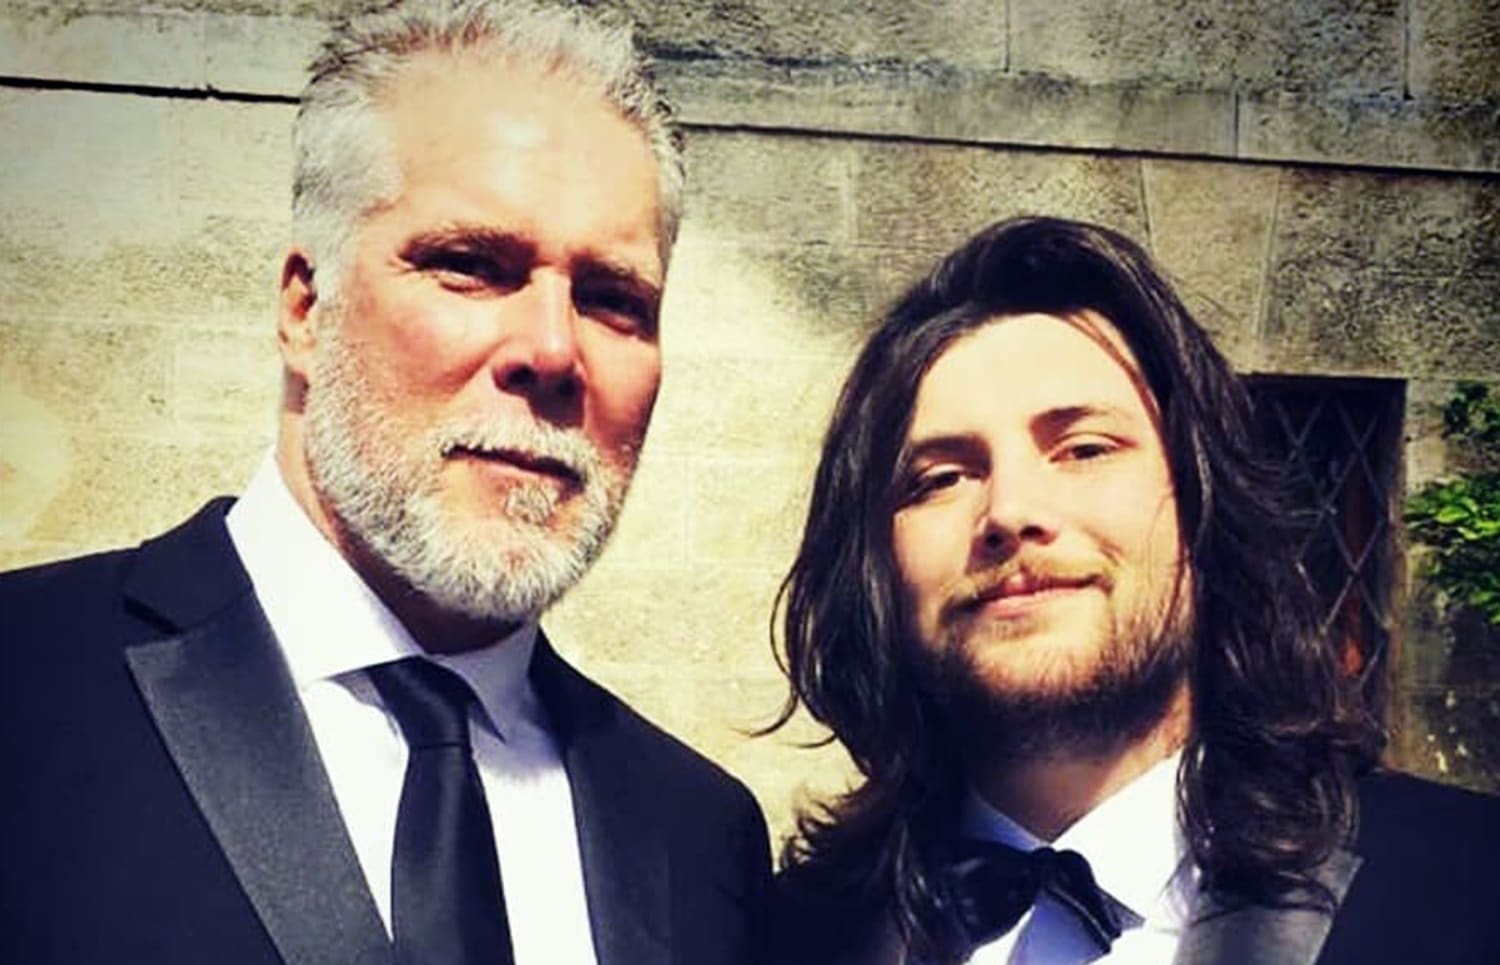 Wwe Star Kevin Nash Says His Son Tristen Died After A Seizure